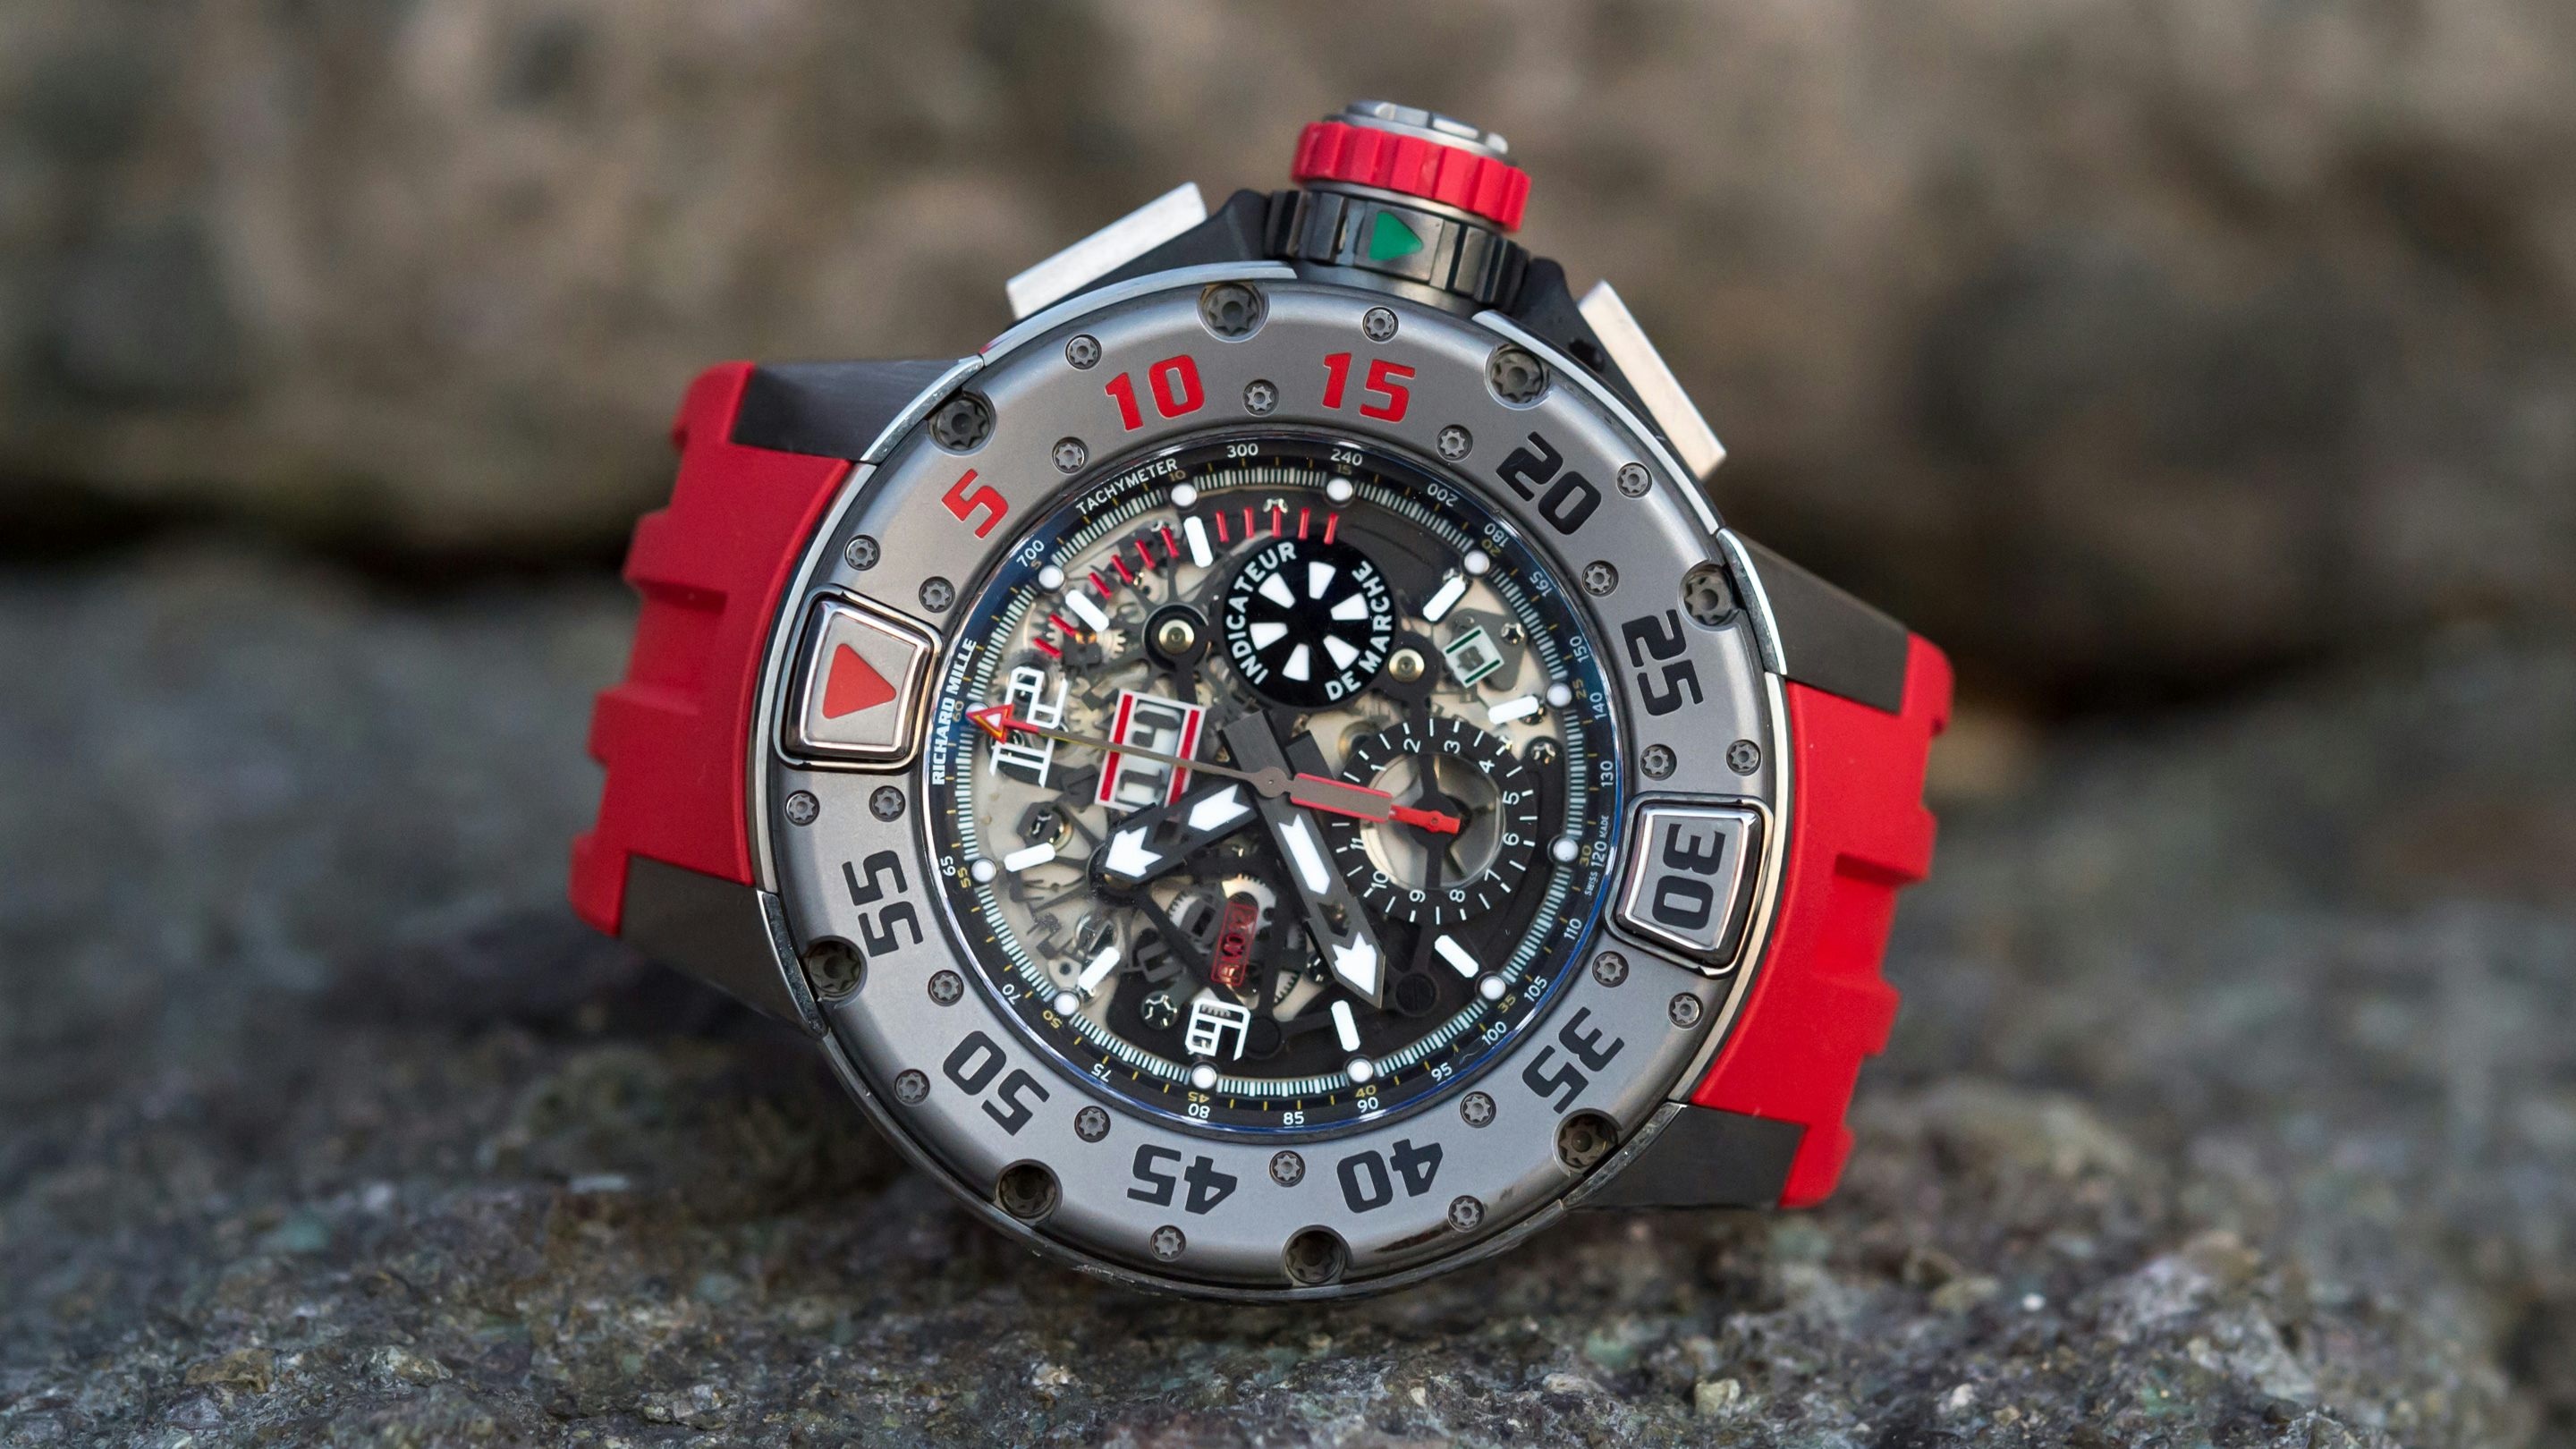 Hands-On: The Richard Mille RM 032 Diver Flyback Chronograph - Hodinkee